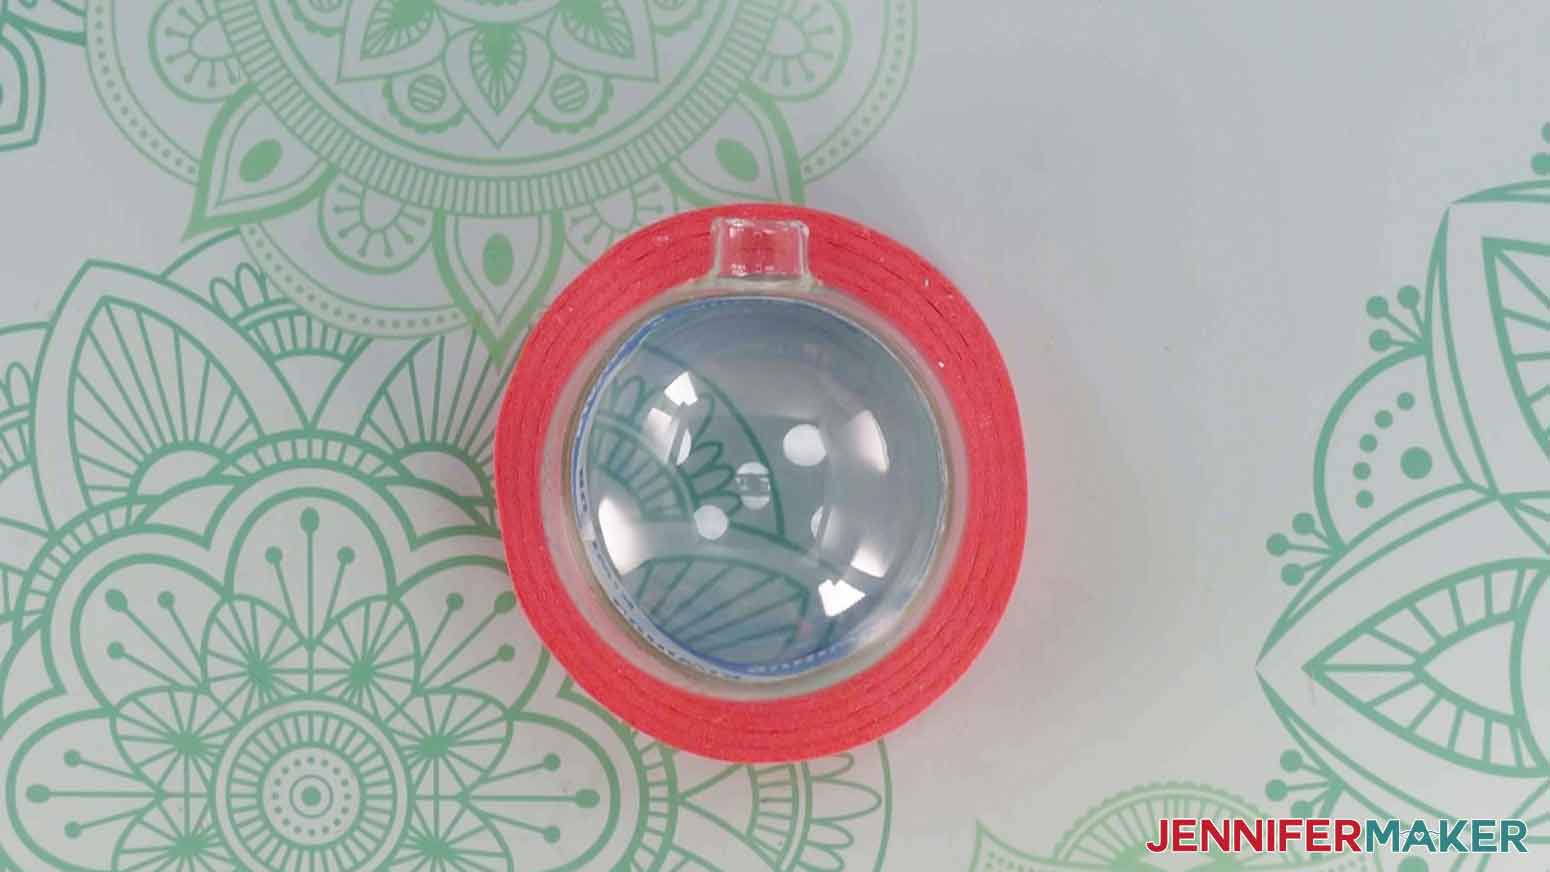 A blank glass ornament placed inside a roll of pink painter's tape lying on its side on a work surface